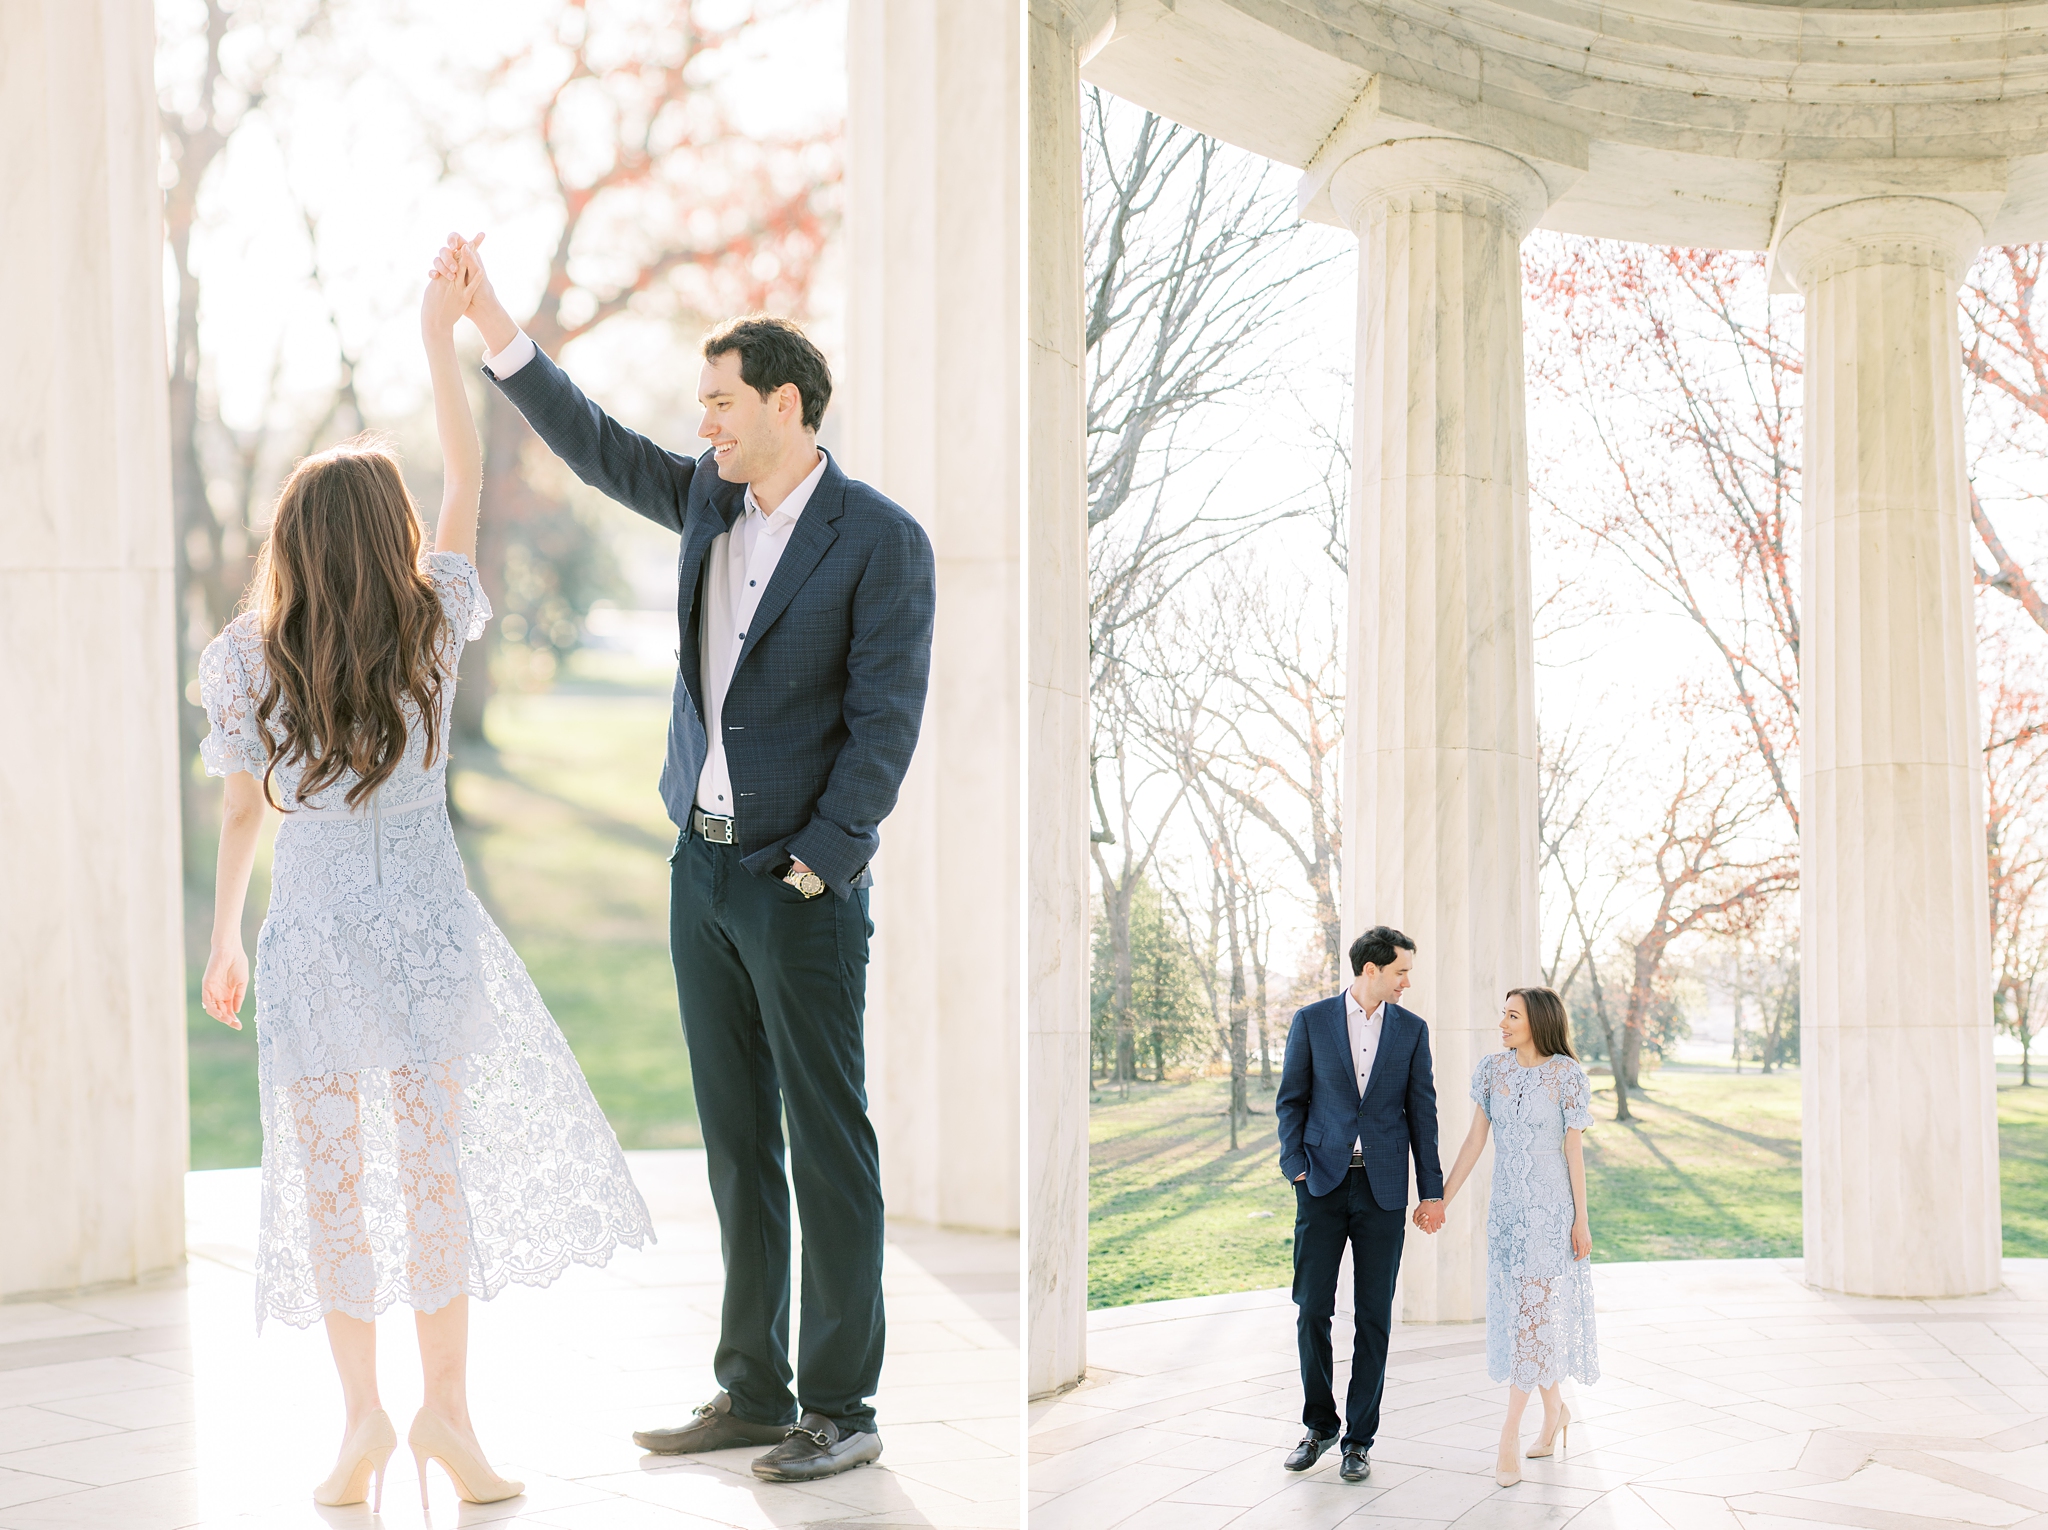 We were hoping to capture Valeria & John's engagement session during peak bloom, but it was worth it to squeeze their session in before all the craziness picked up over the past week! Luckily we were still able to capture a bit of that iconic beauty from some early blossoms! See it all over on the blog! #linkinprofile